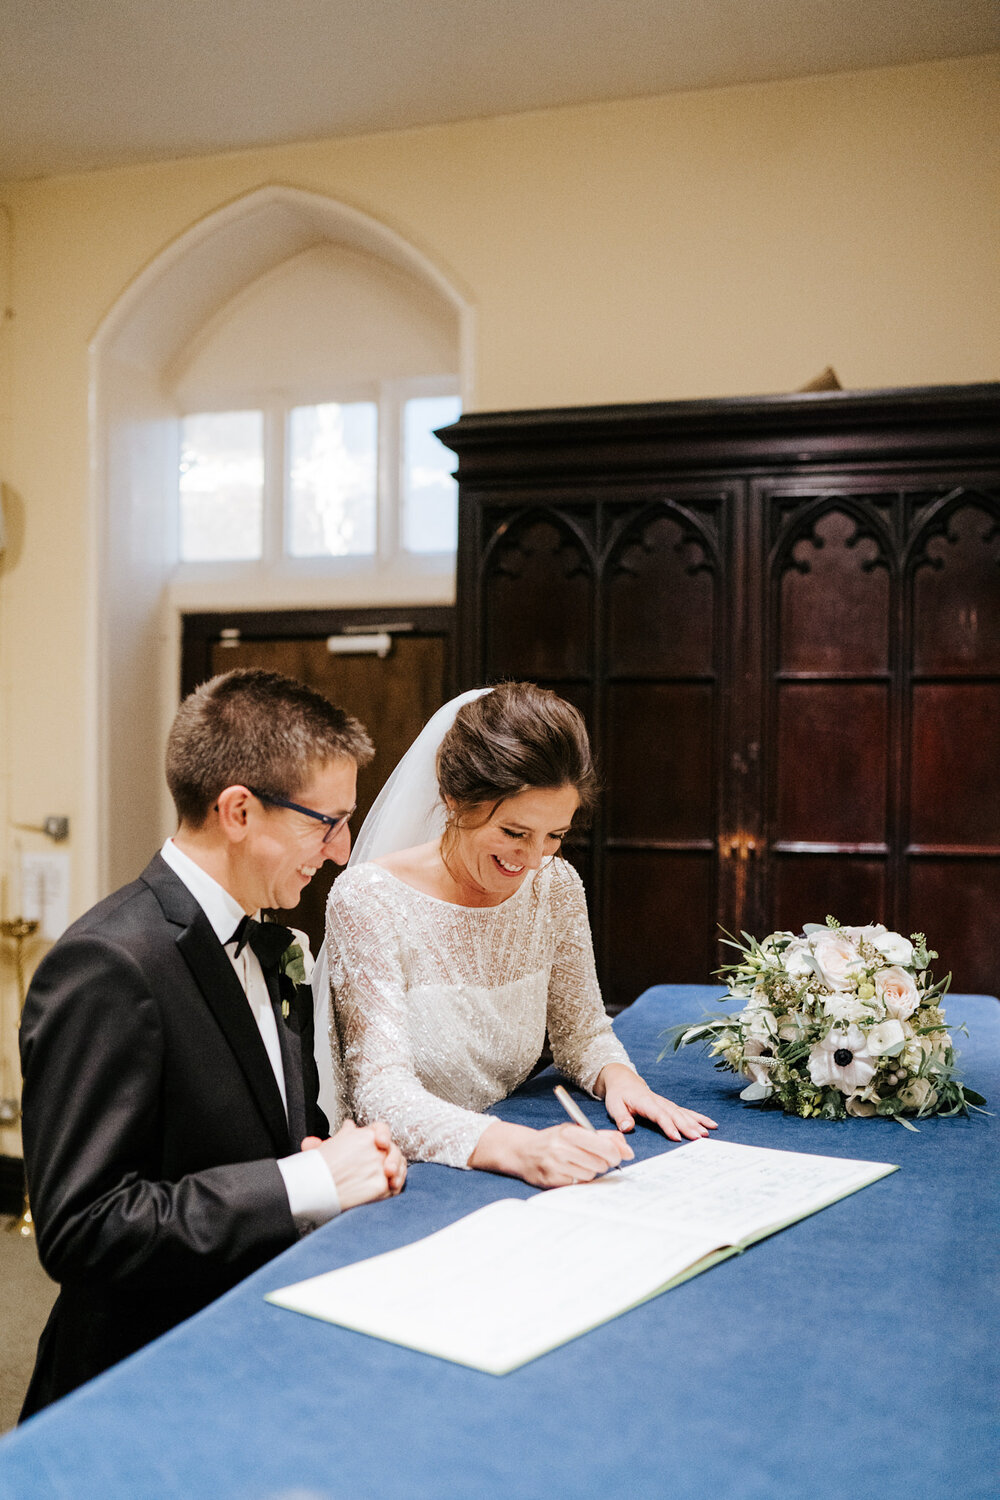 Bride and groom sign the register during wedding ceremony at St Pauls Knightsbridge